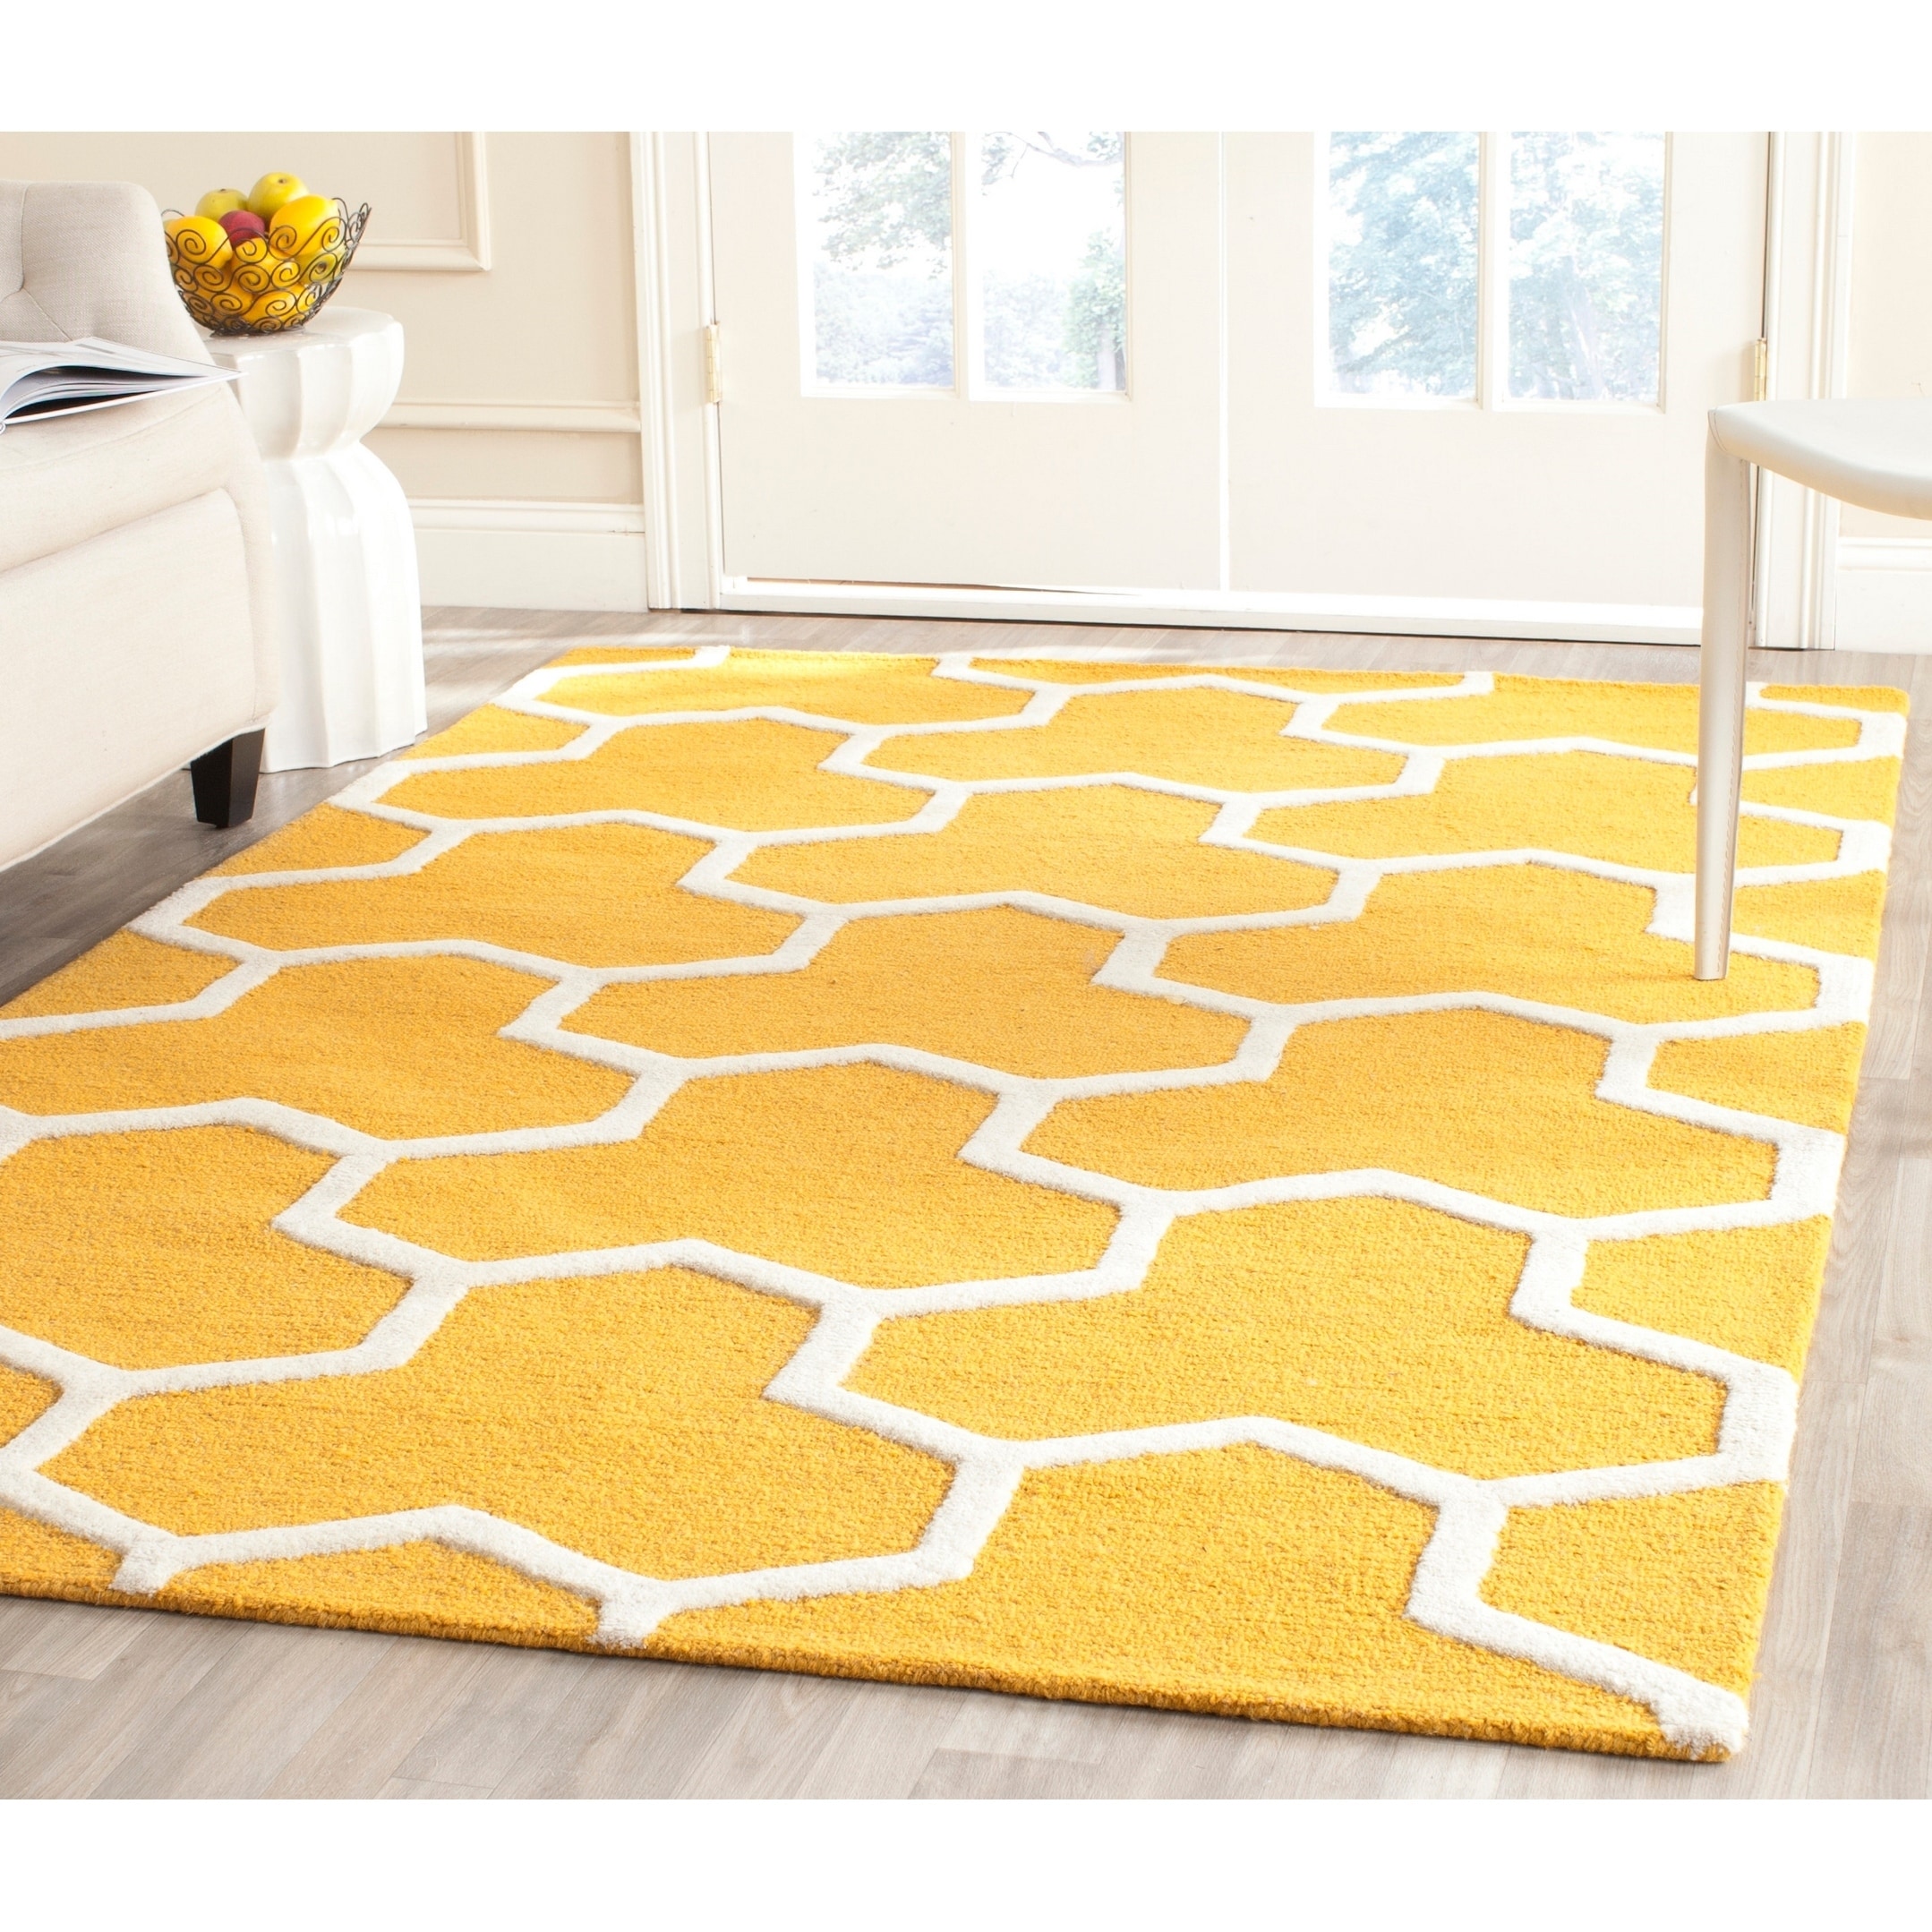 Safavieh Handmade Moroccan Cambridge Gold/ Ivory Wool Rug With High/ Low Construction (9 X 12)